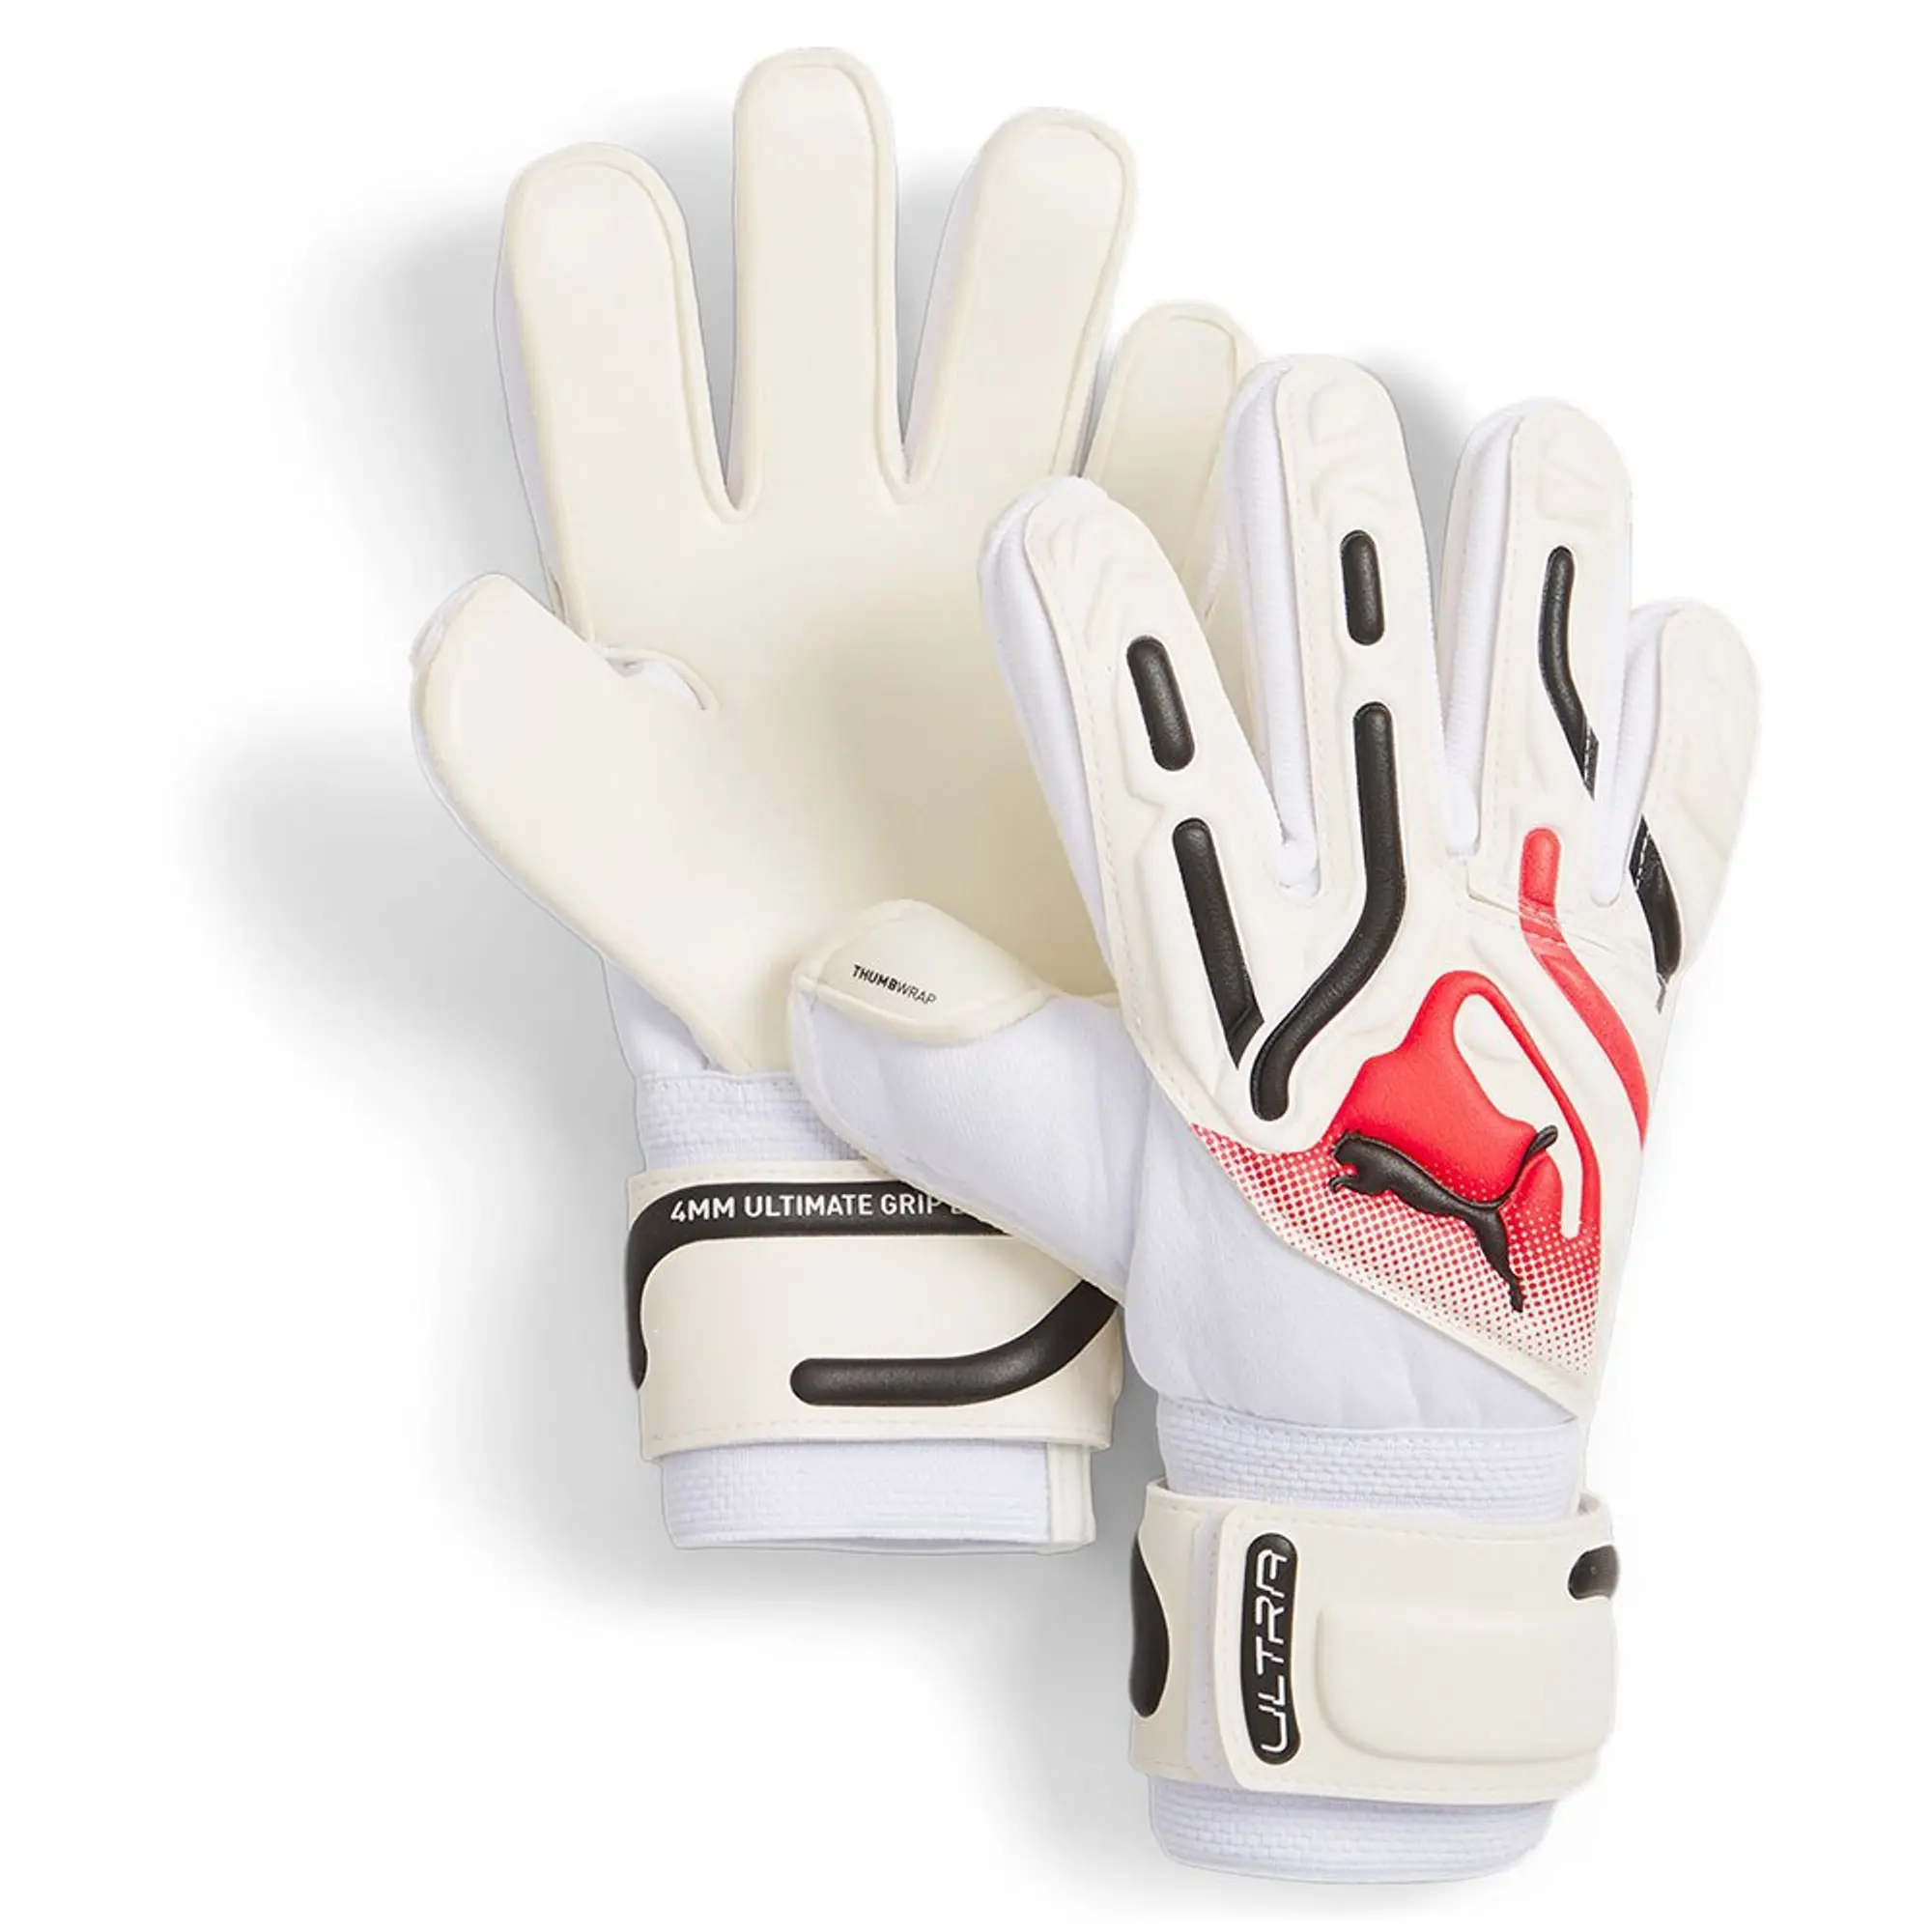 PUMA Ultra Pro Rc Youth Goalkeeper Gloves, White/Ultra Blue/Fire Orchid